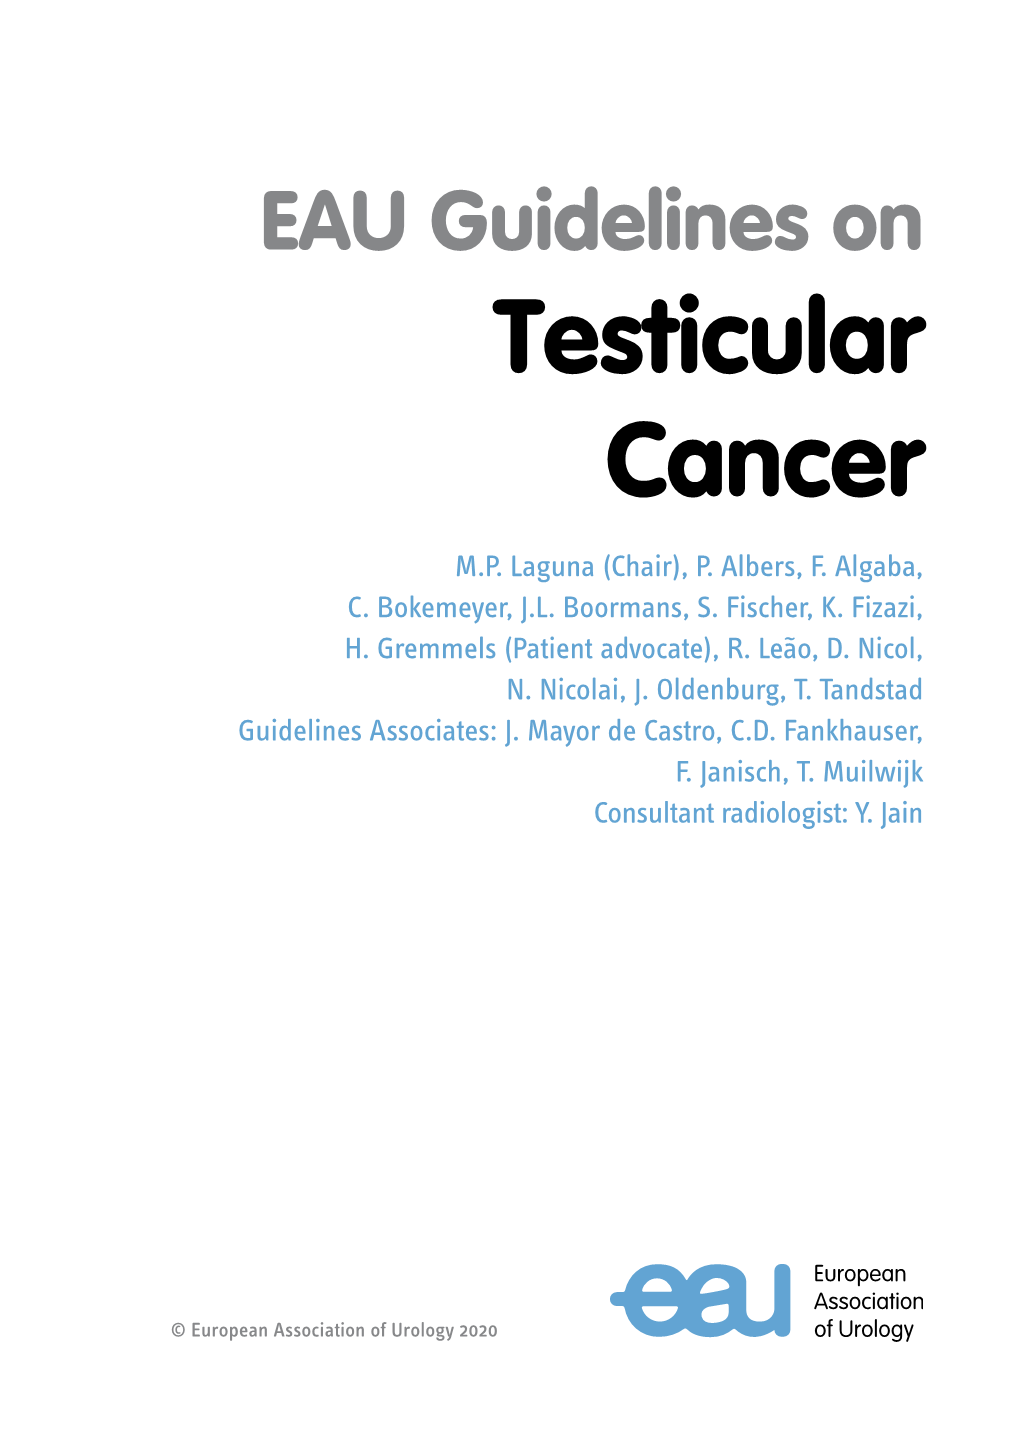 EAU Guidelines on Testicular Cancer 2020